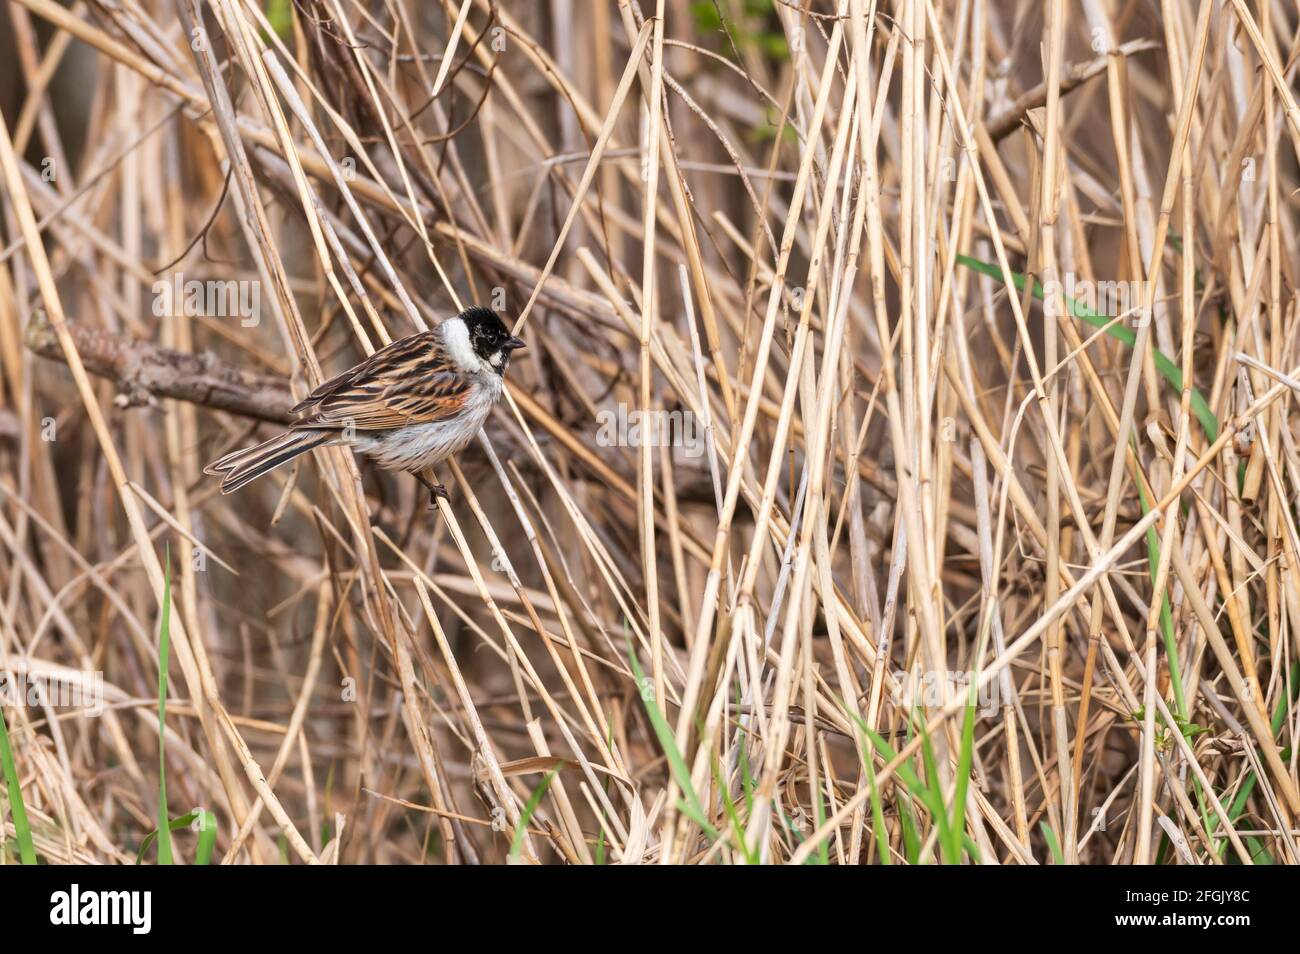 A reed bunting sits on the stalk of reeds Stock Photo